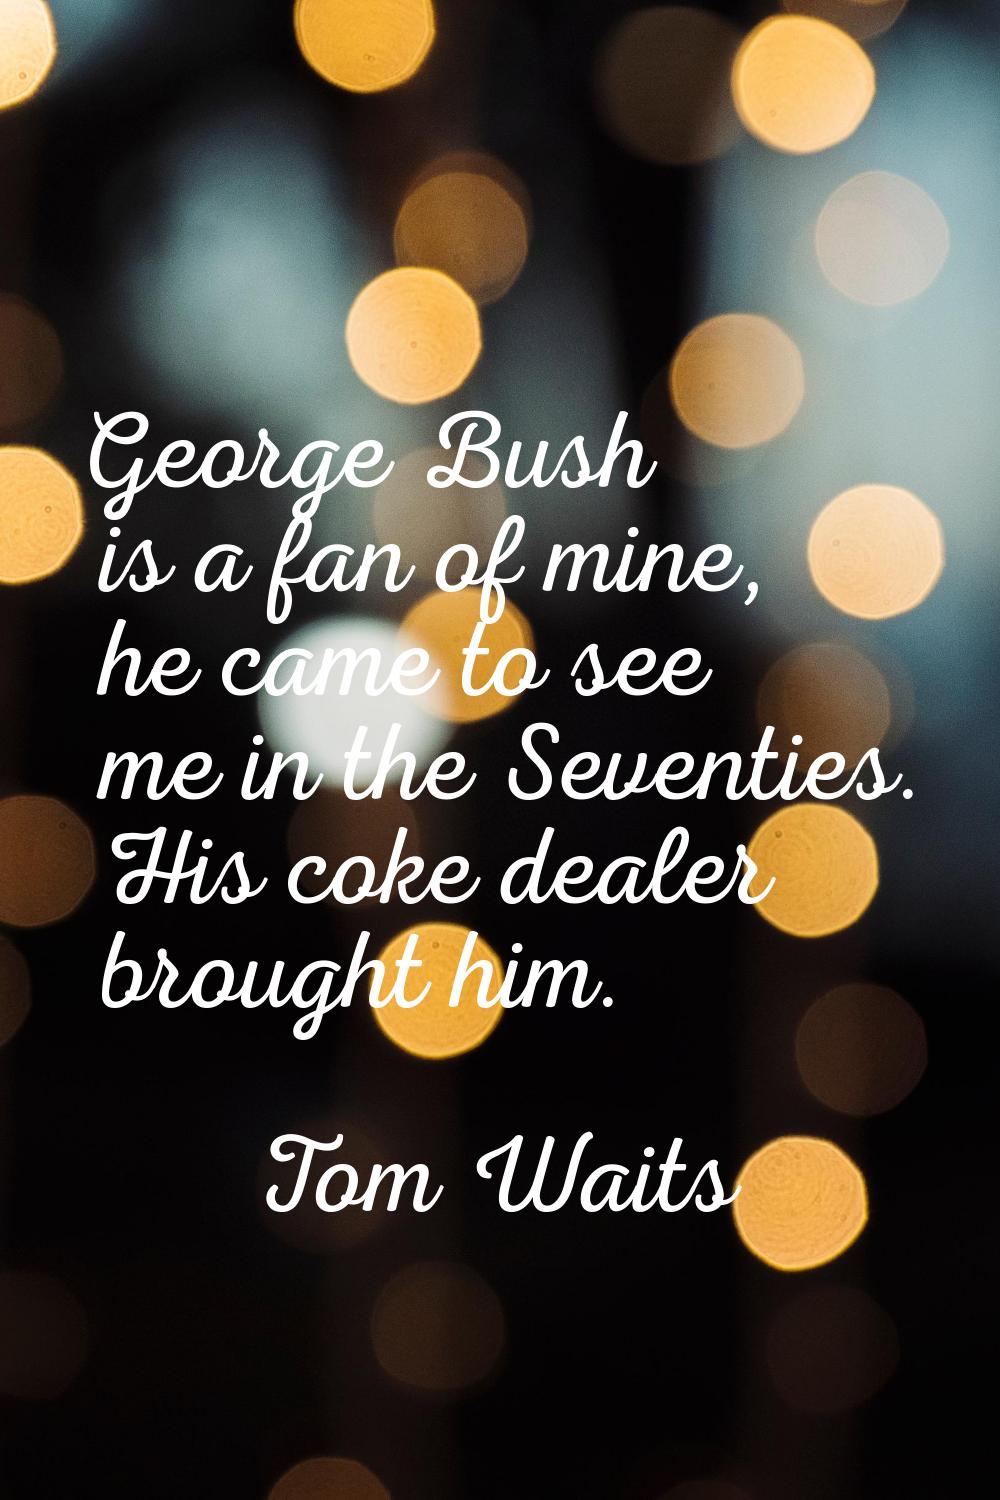 George Bush is a fan of mine, he came to see me in the Seventies. His coke dealer brought him.